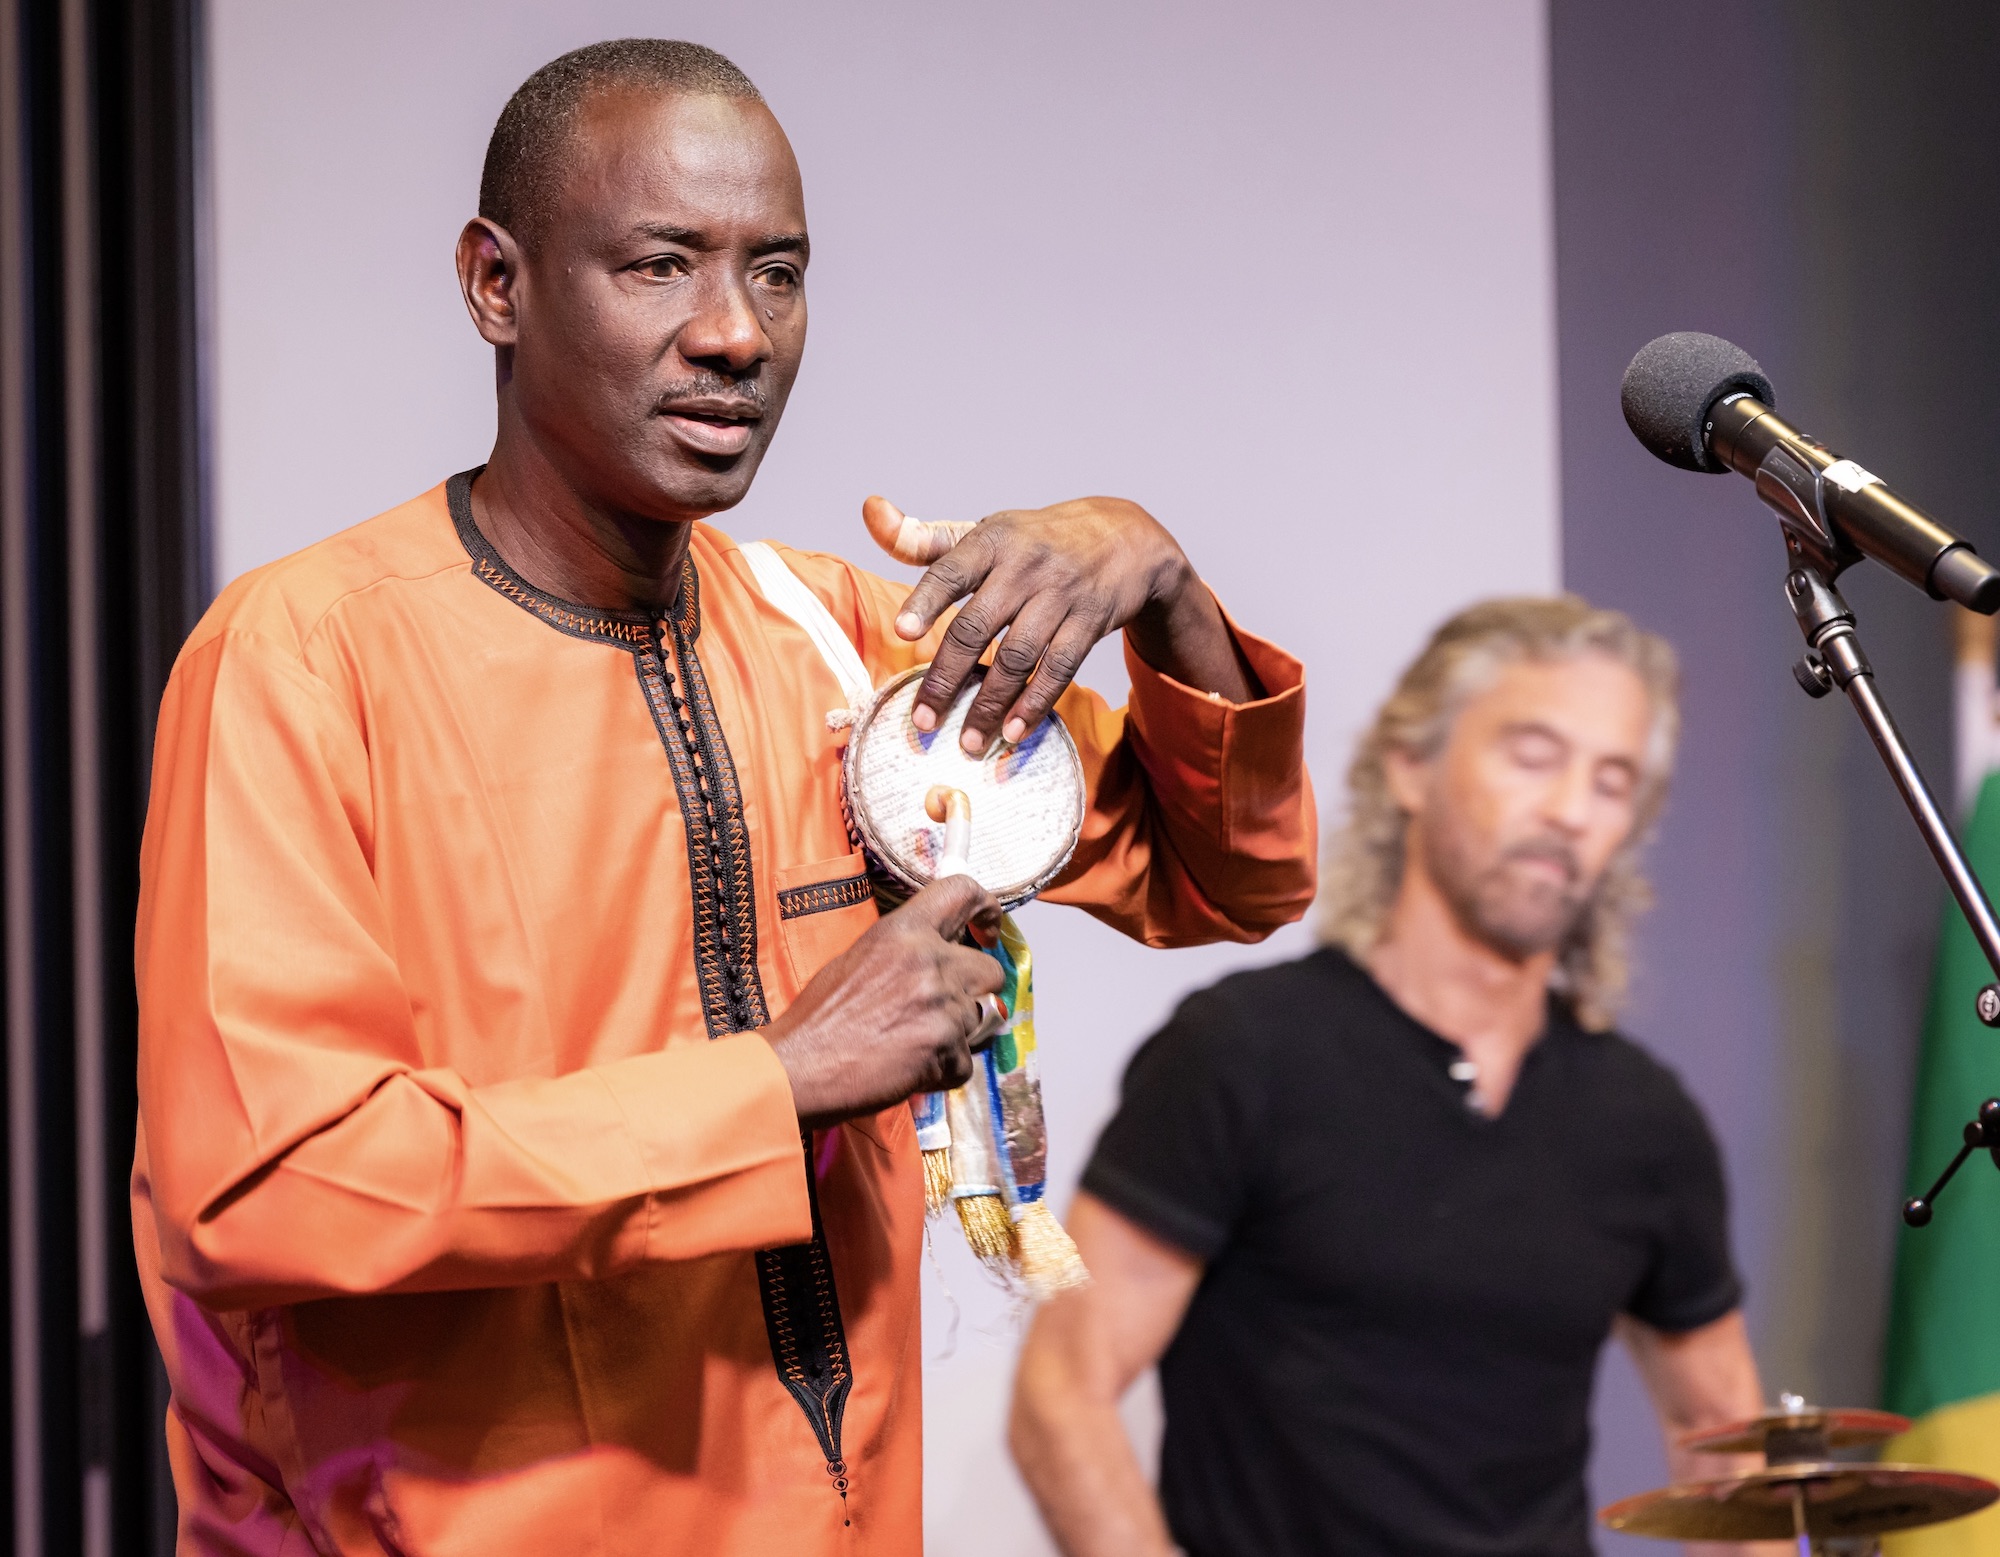 Massamba Diop demonstrates the 'talking drum' accompanied by percussionist Tony Vacca.